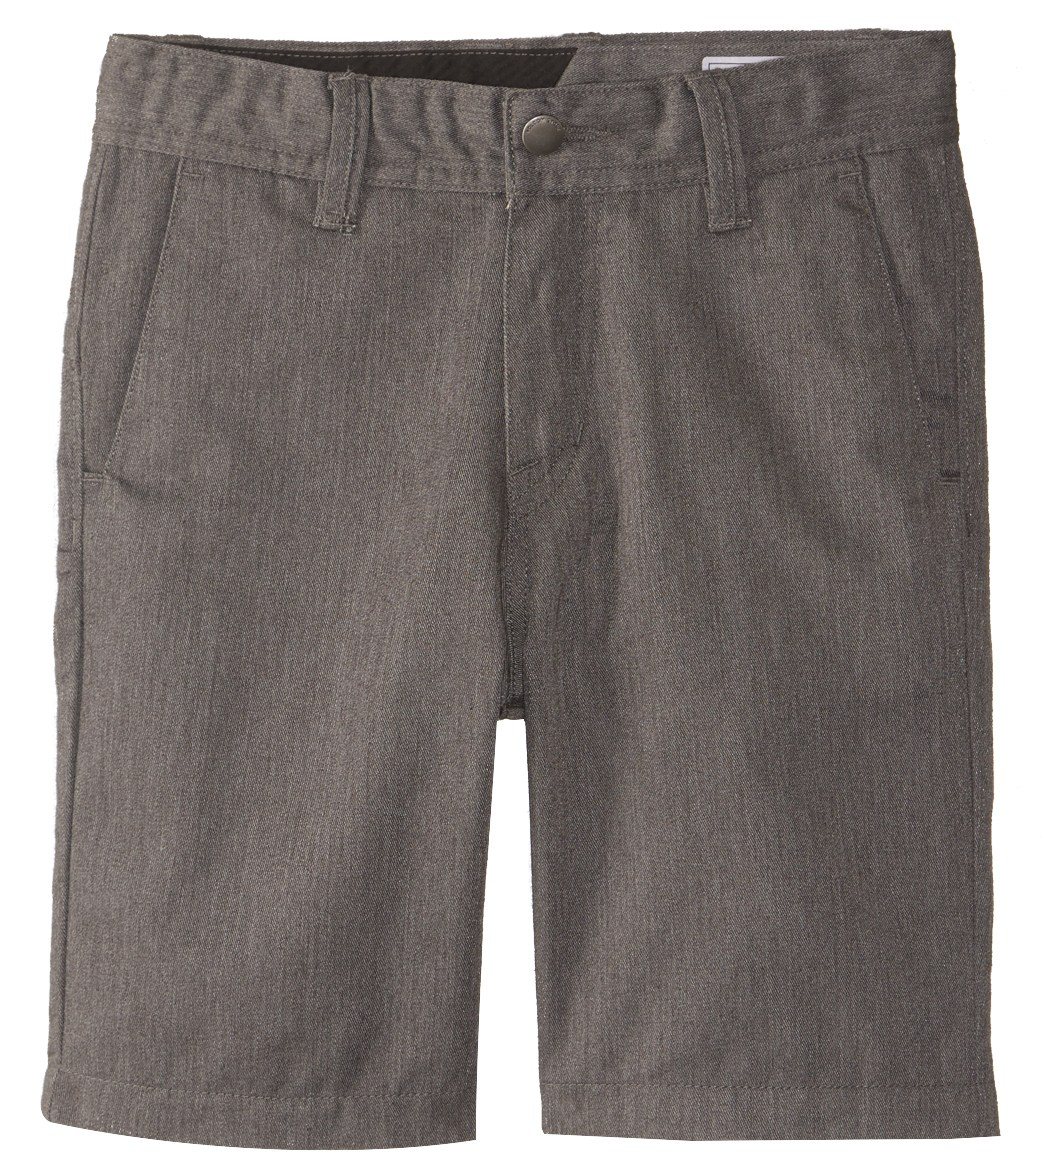 Volcom Kid's Frickin Chino Walkshorts - Charcoal Heather 2T Cotton/Polyester - Swimoutlet.com